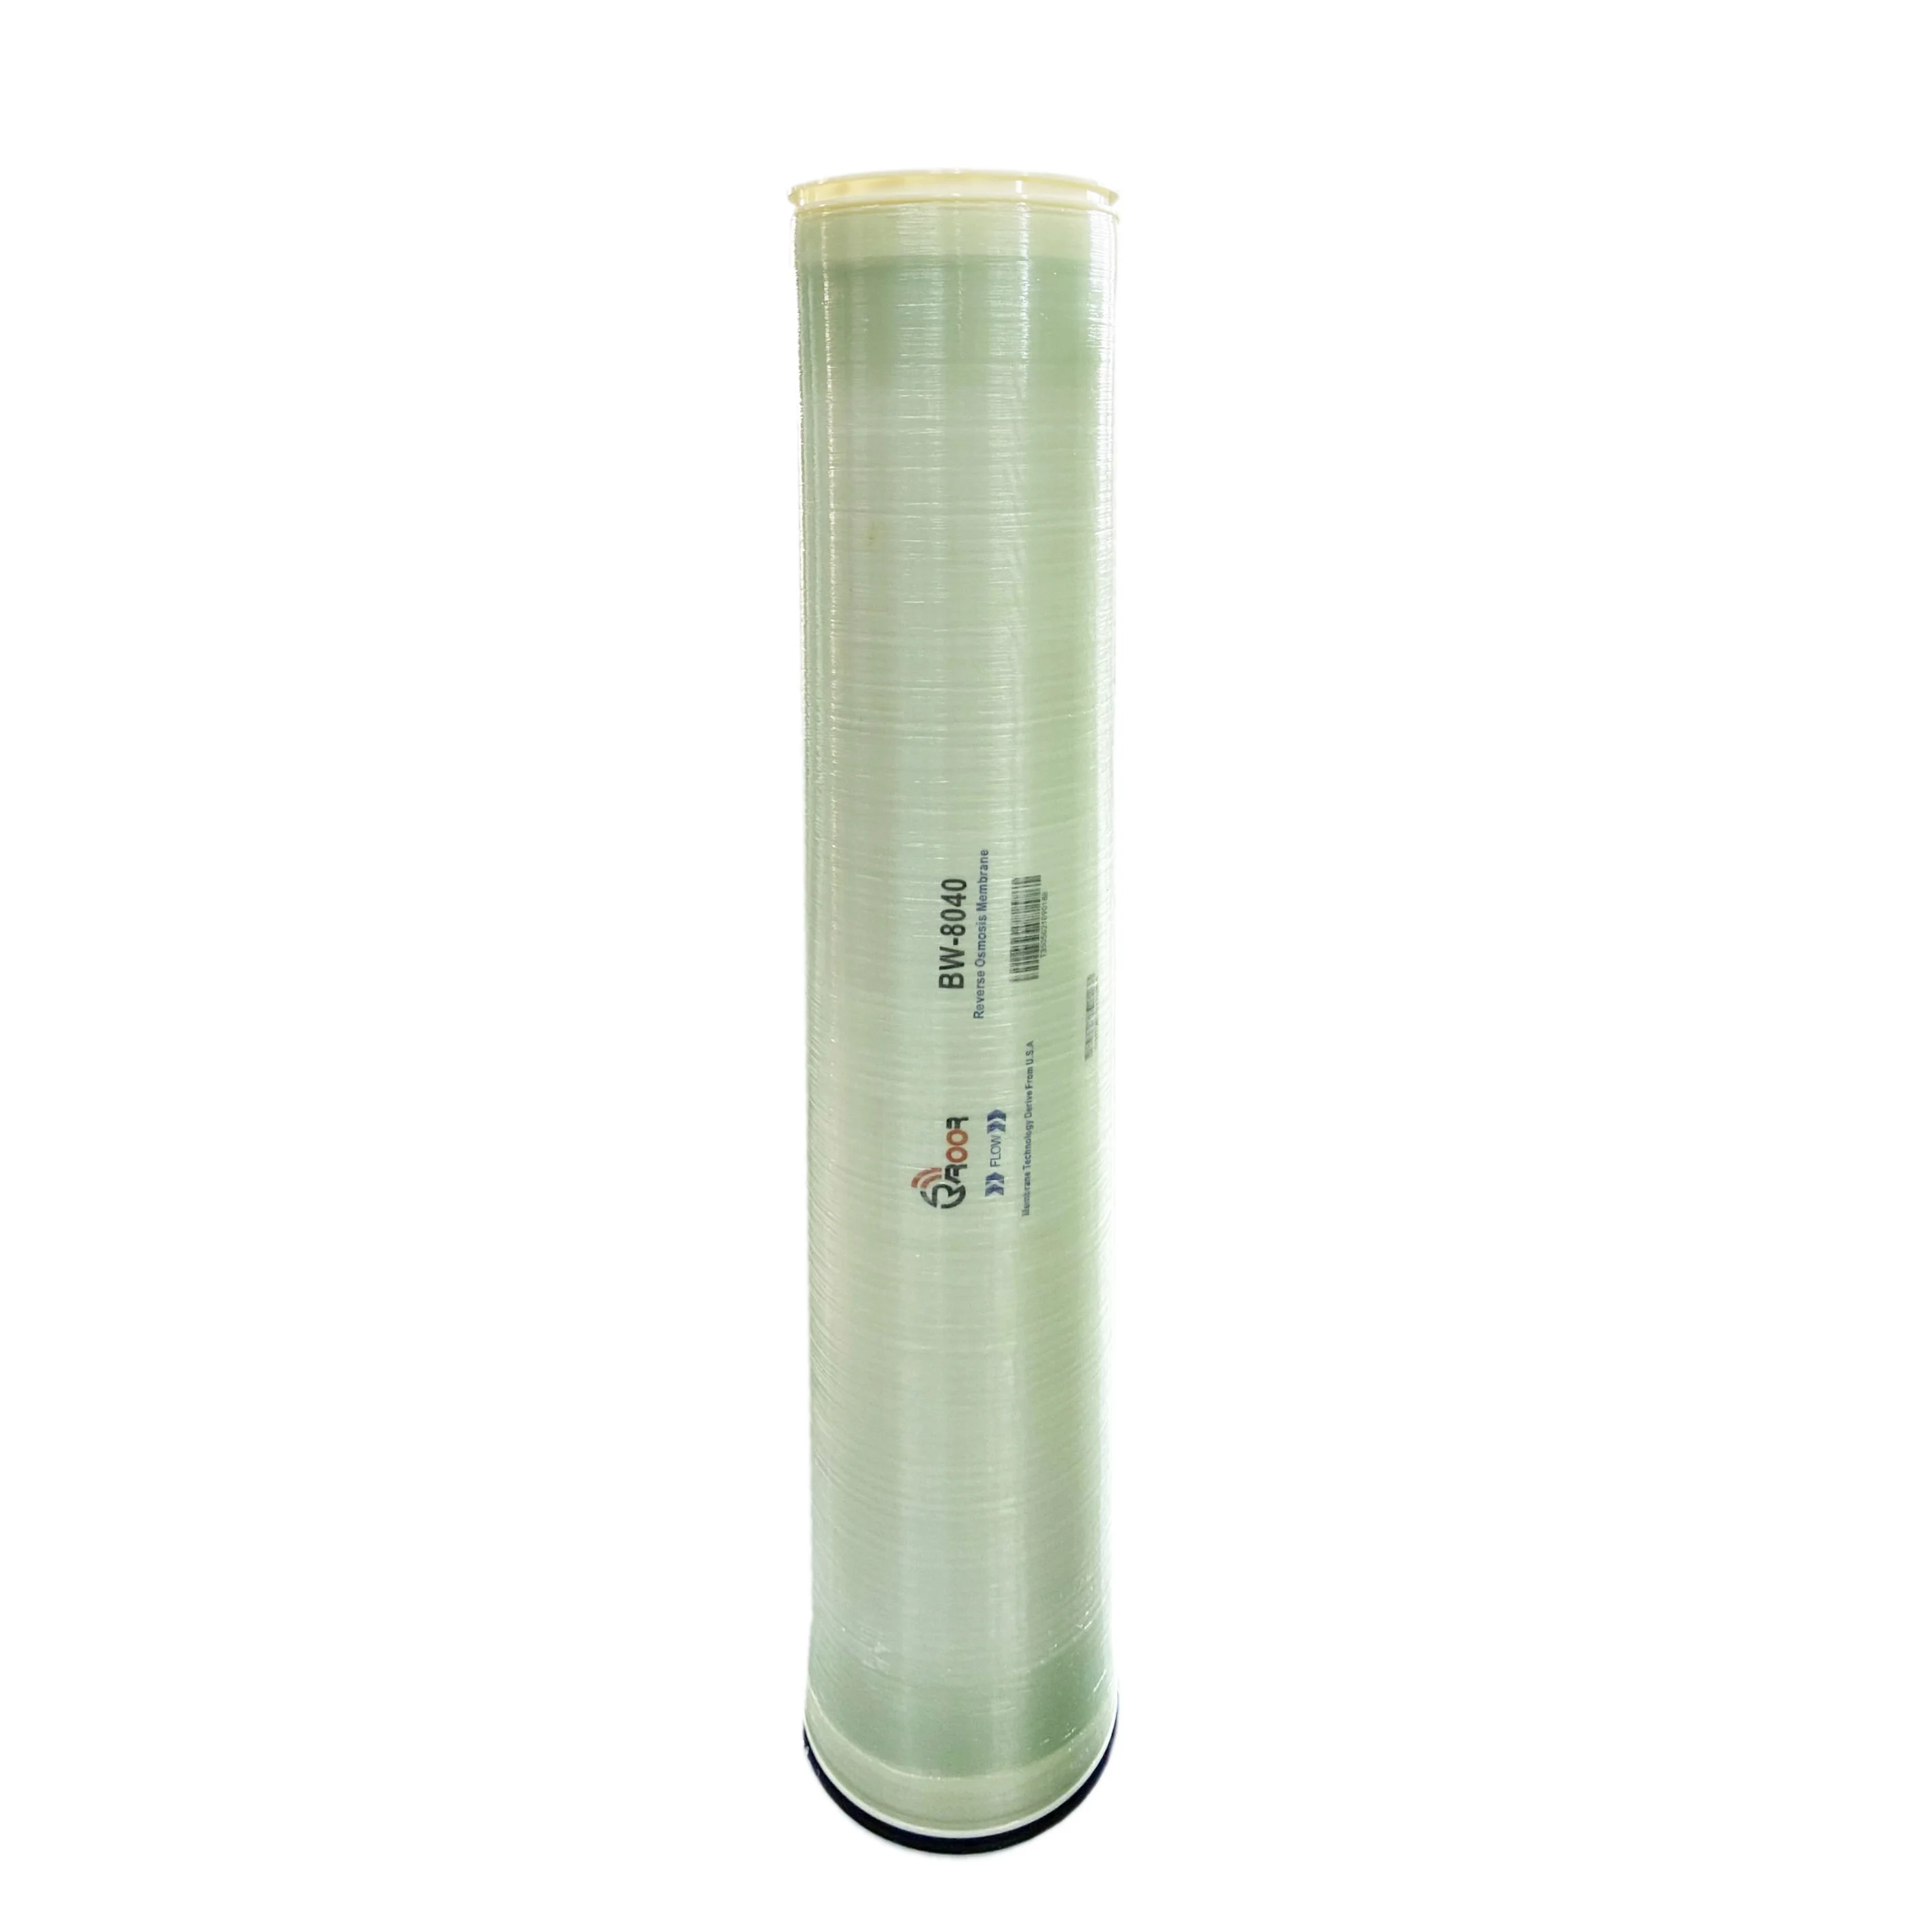 TF 8040 SOFT reverse osmosis membrane ro membrane filter  For Ro Water treatment plant from factory (1600546920669)